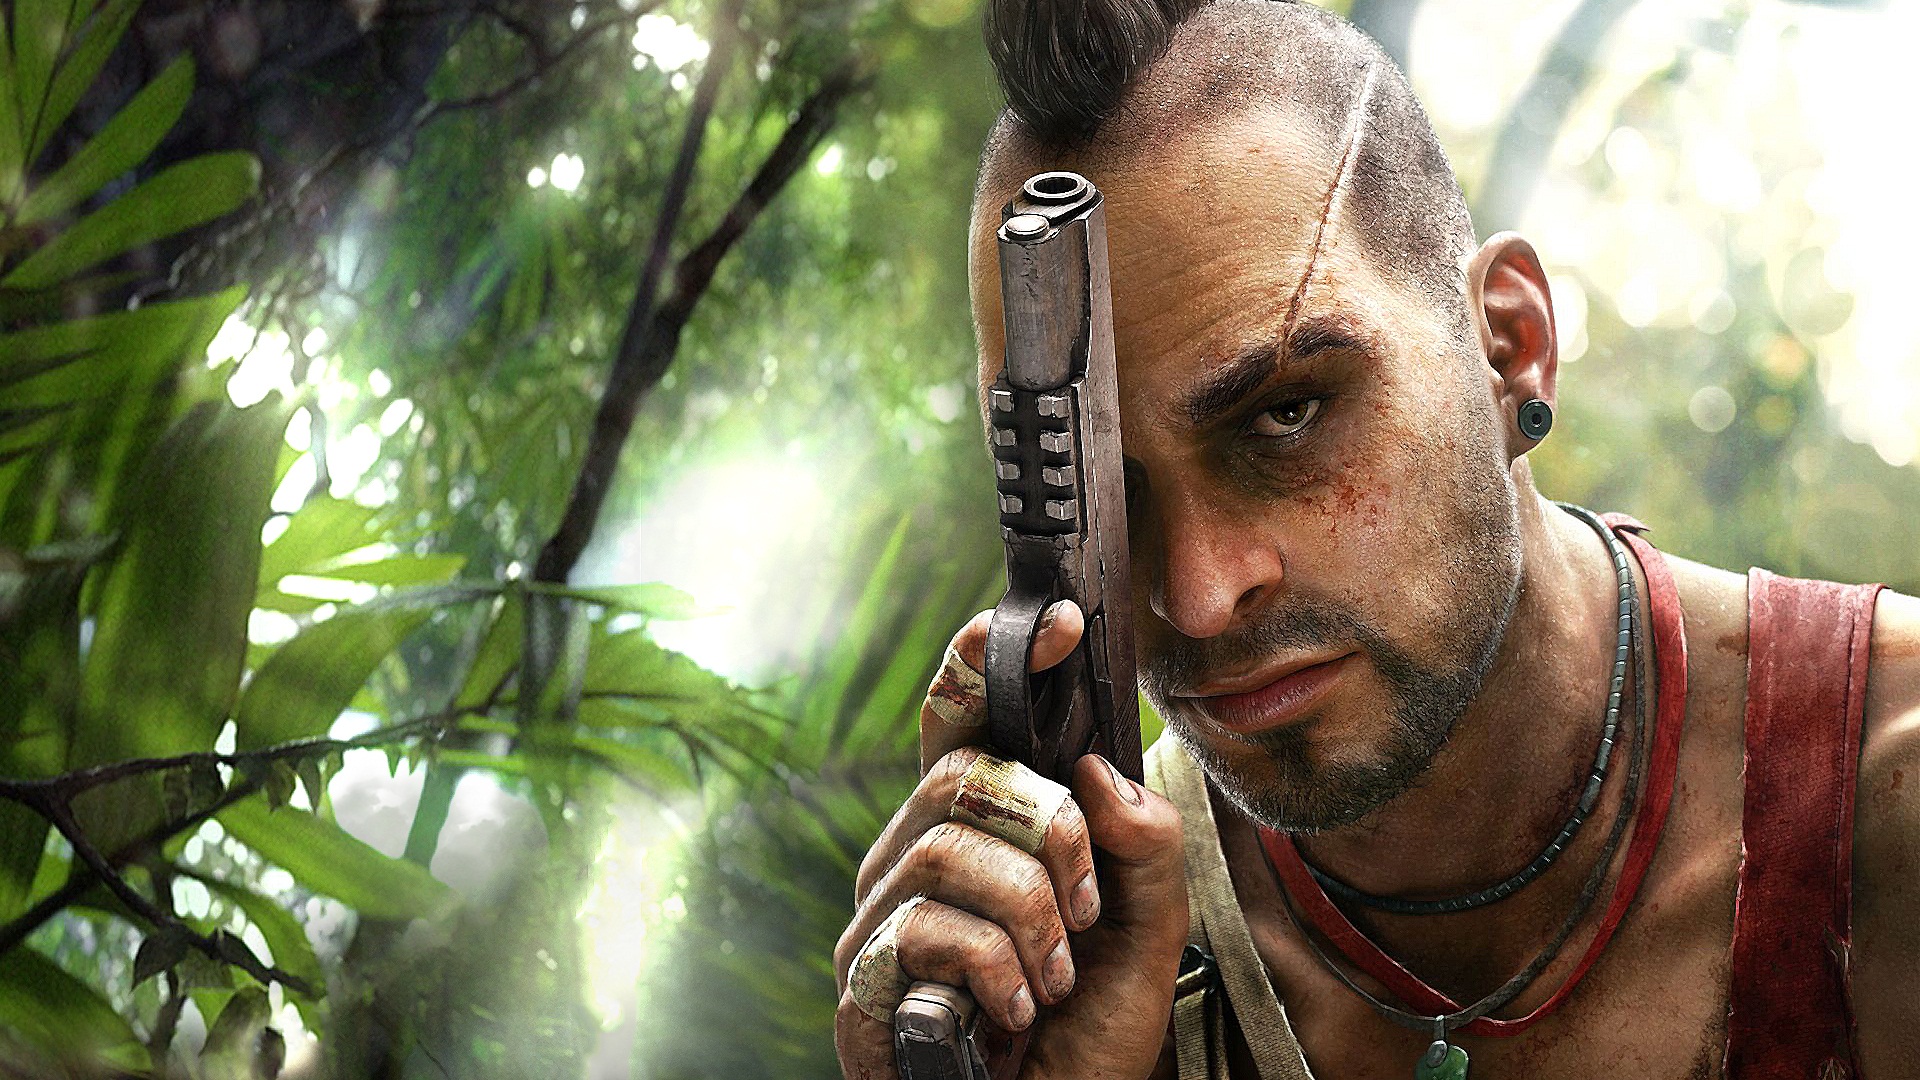 Far Cry VR Game  Far Cry Virtual Reality Experience